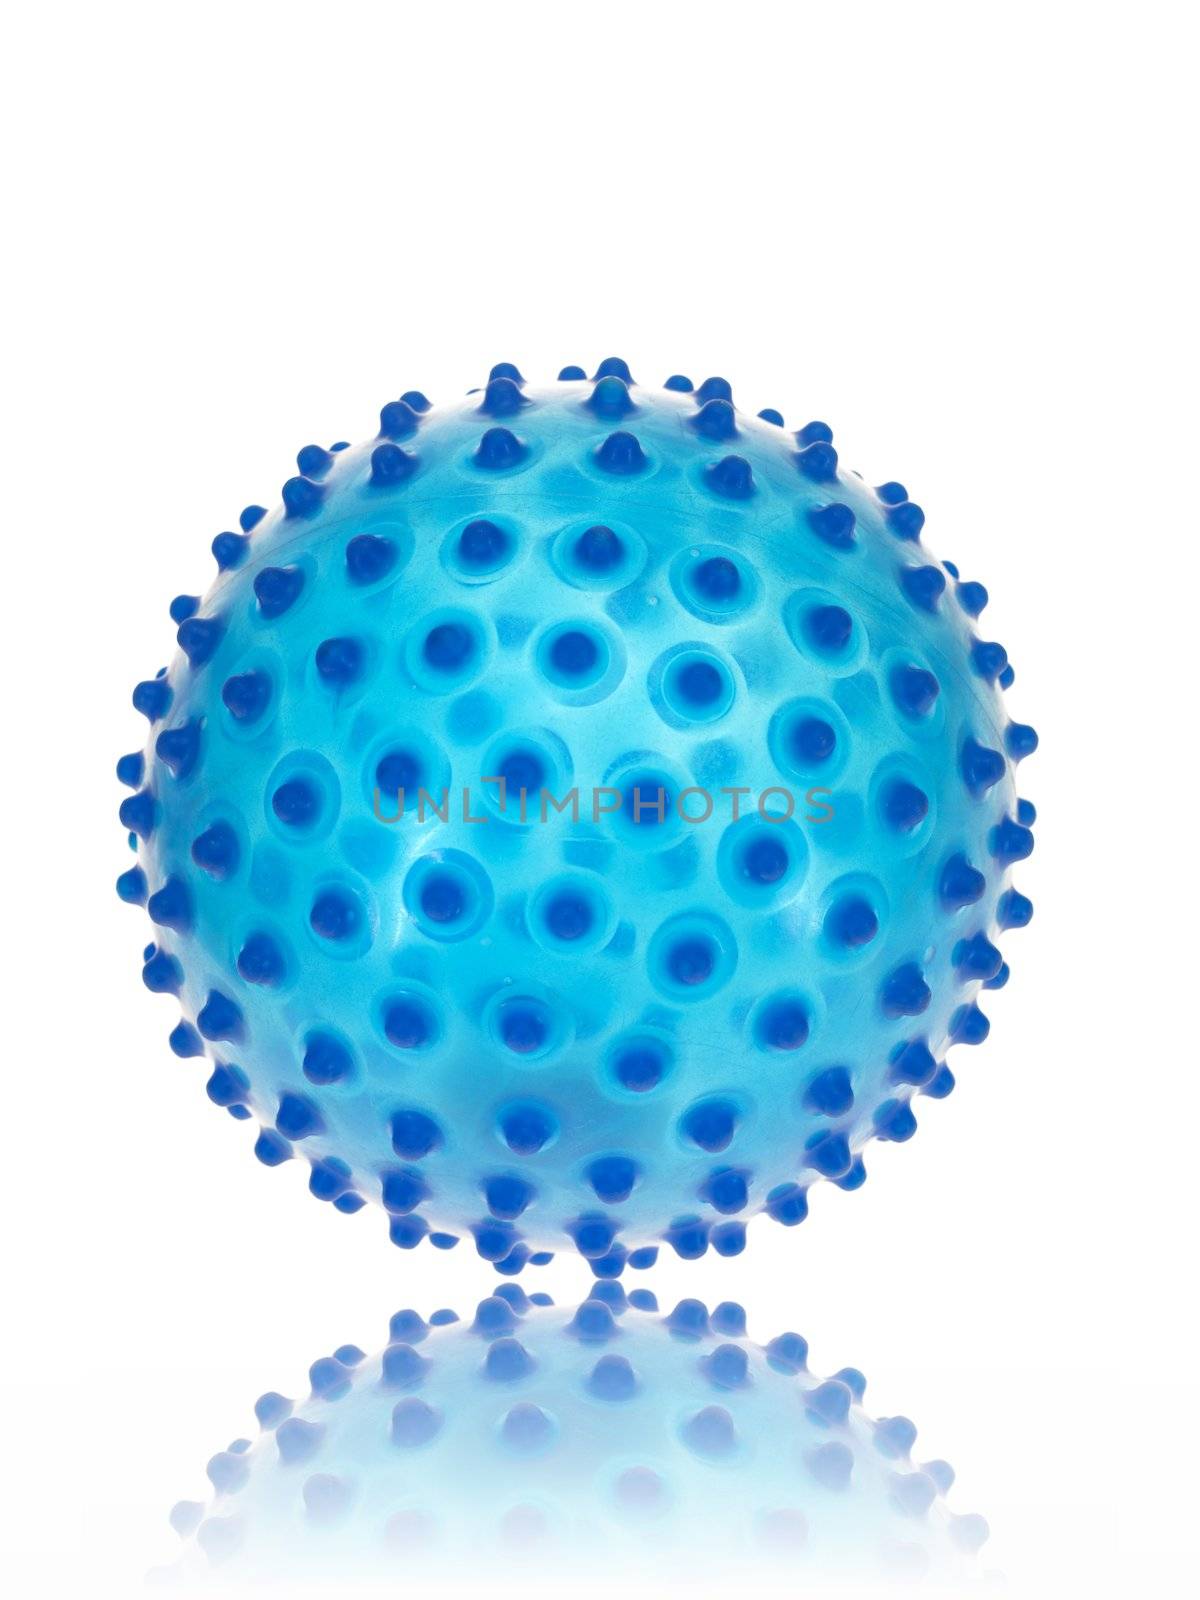 A small ball isolated against a white background